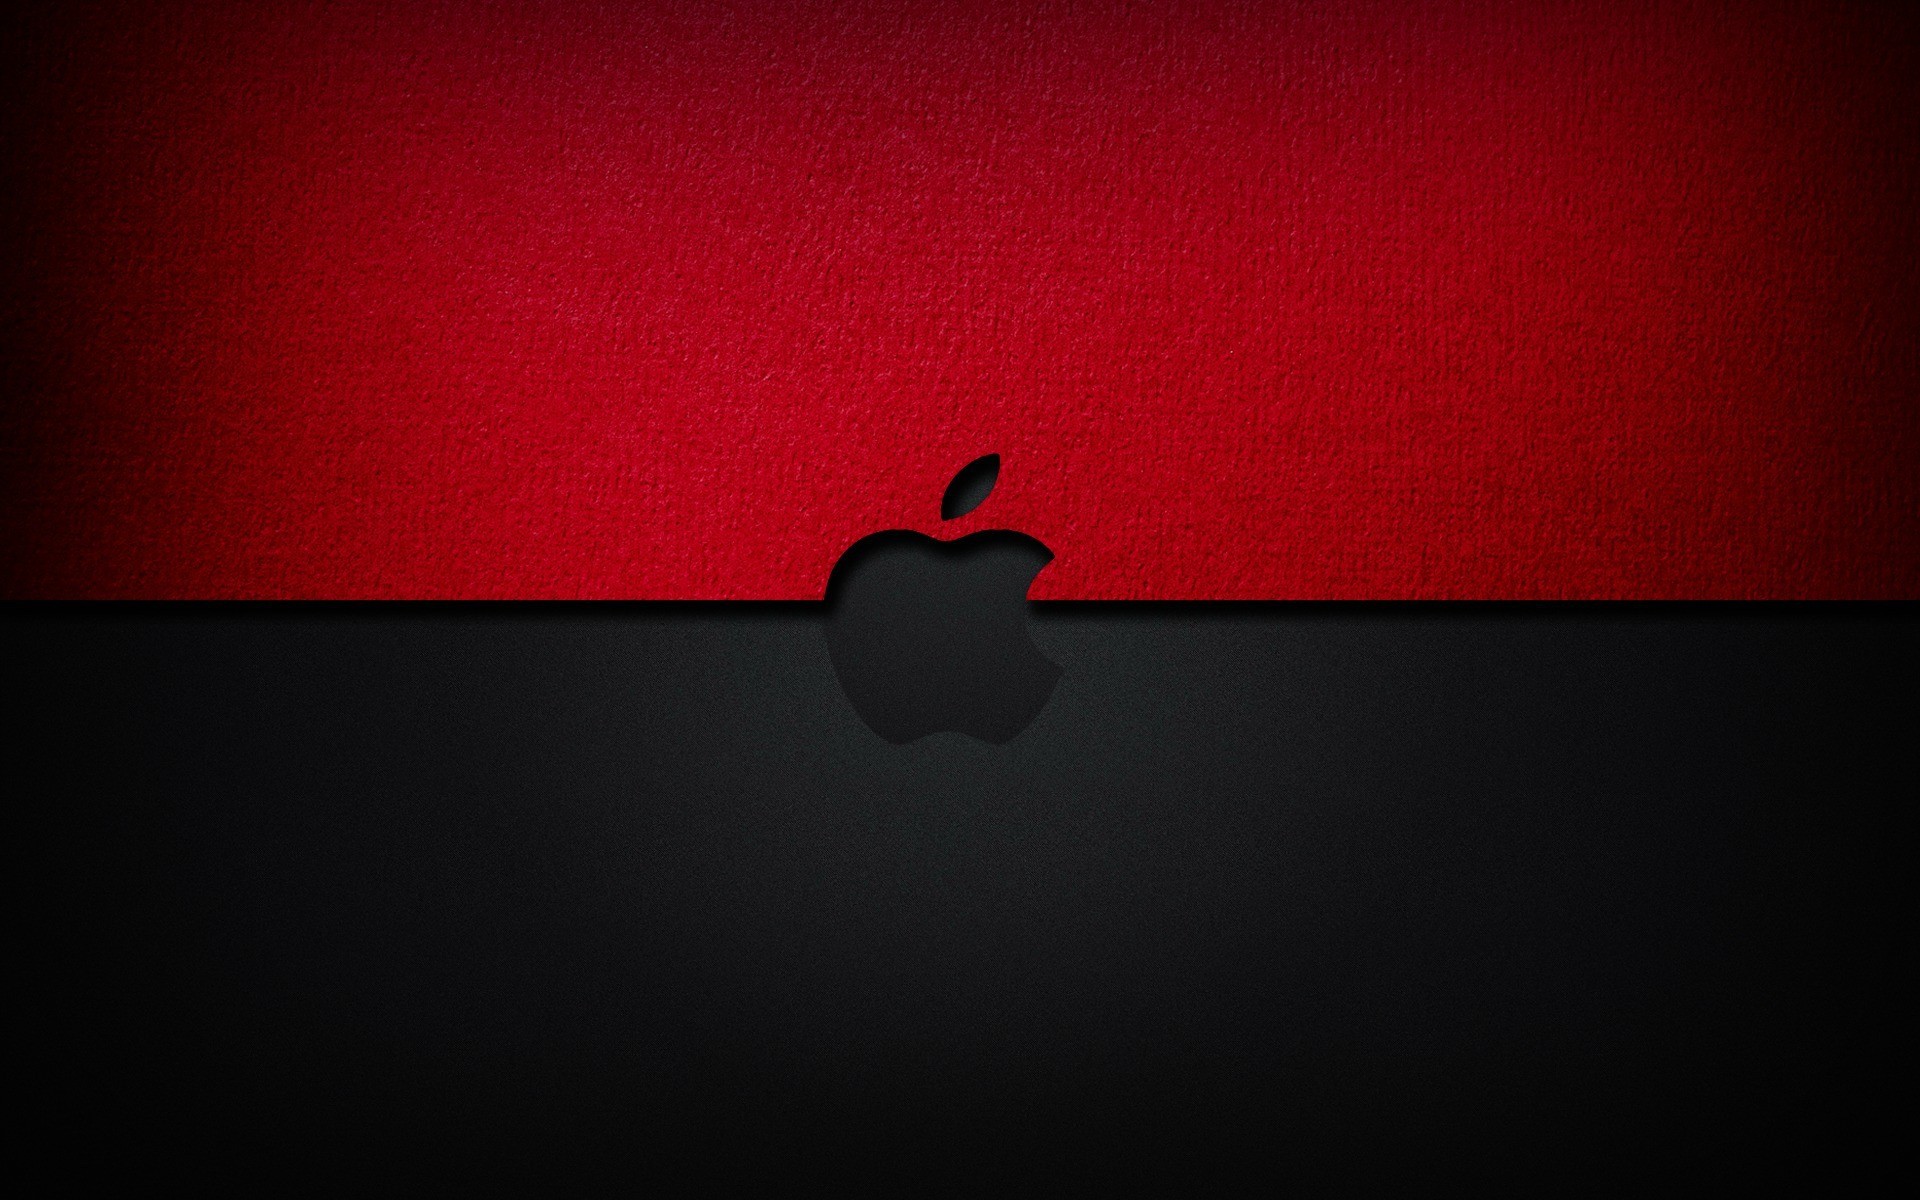 Red Apple Wallpapers (70+ images)